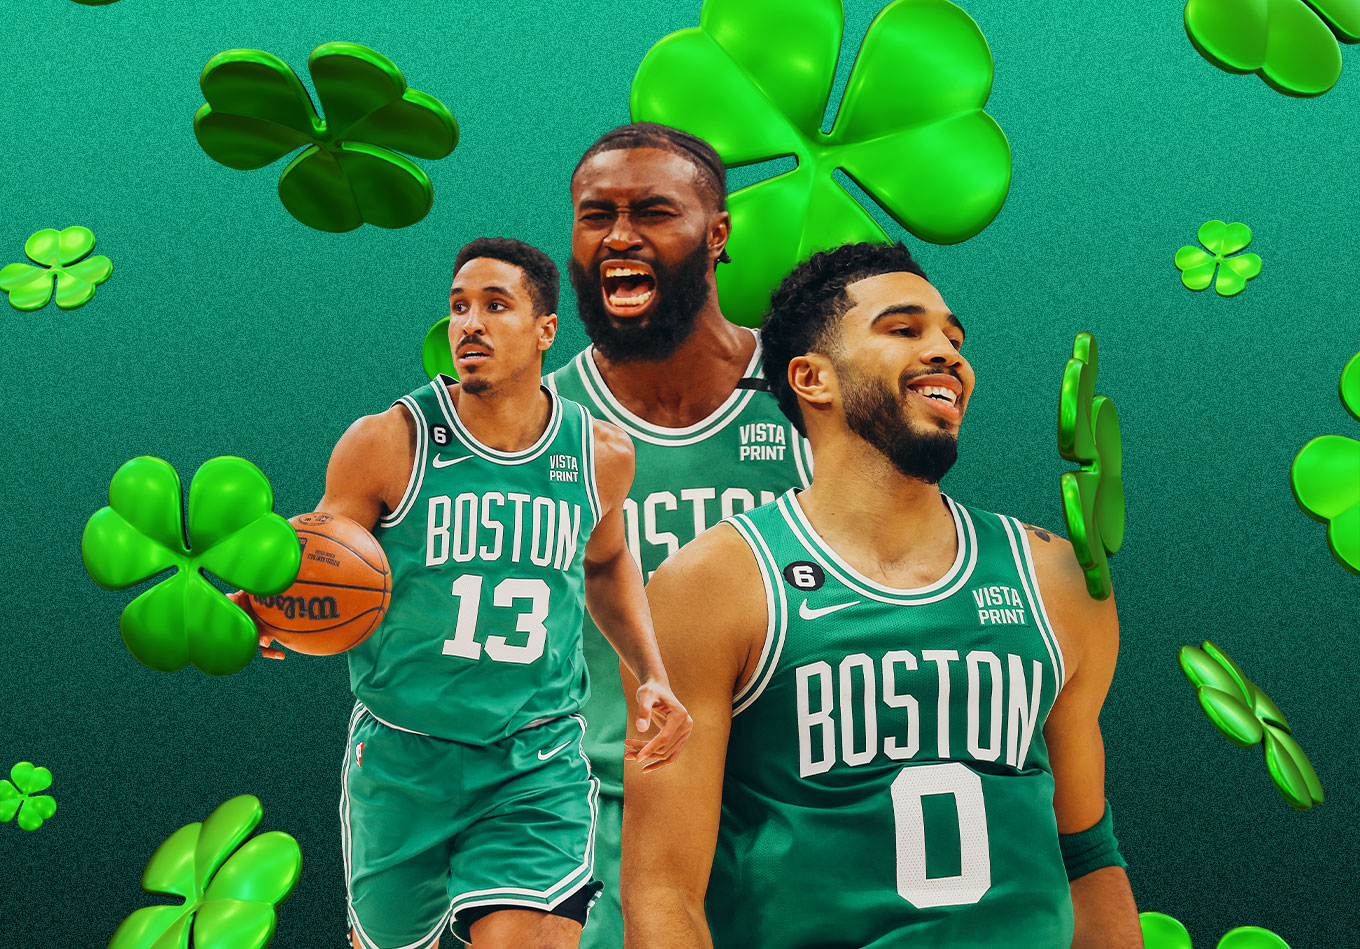 Will the 2022-23 Celtics Go Down as One of the Best Offensive Teams in NBA History?